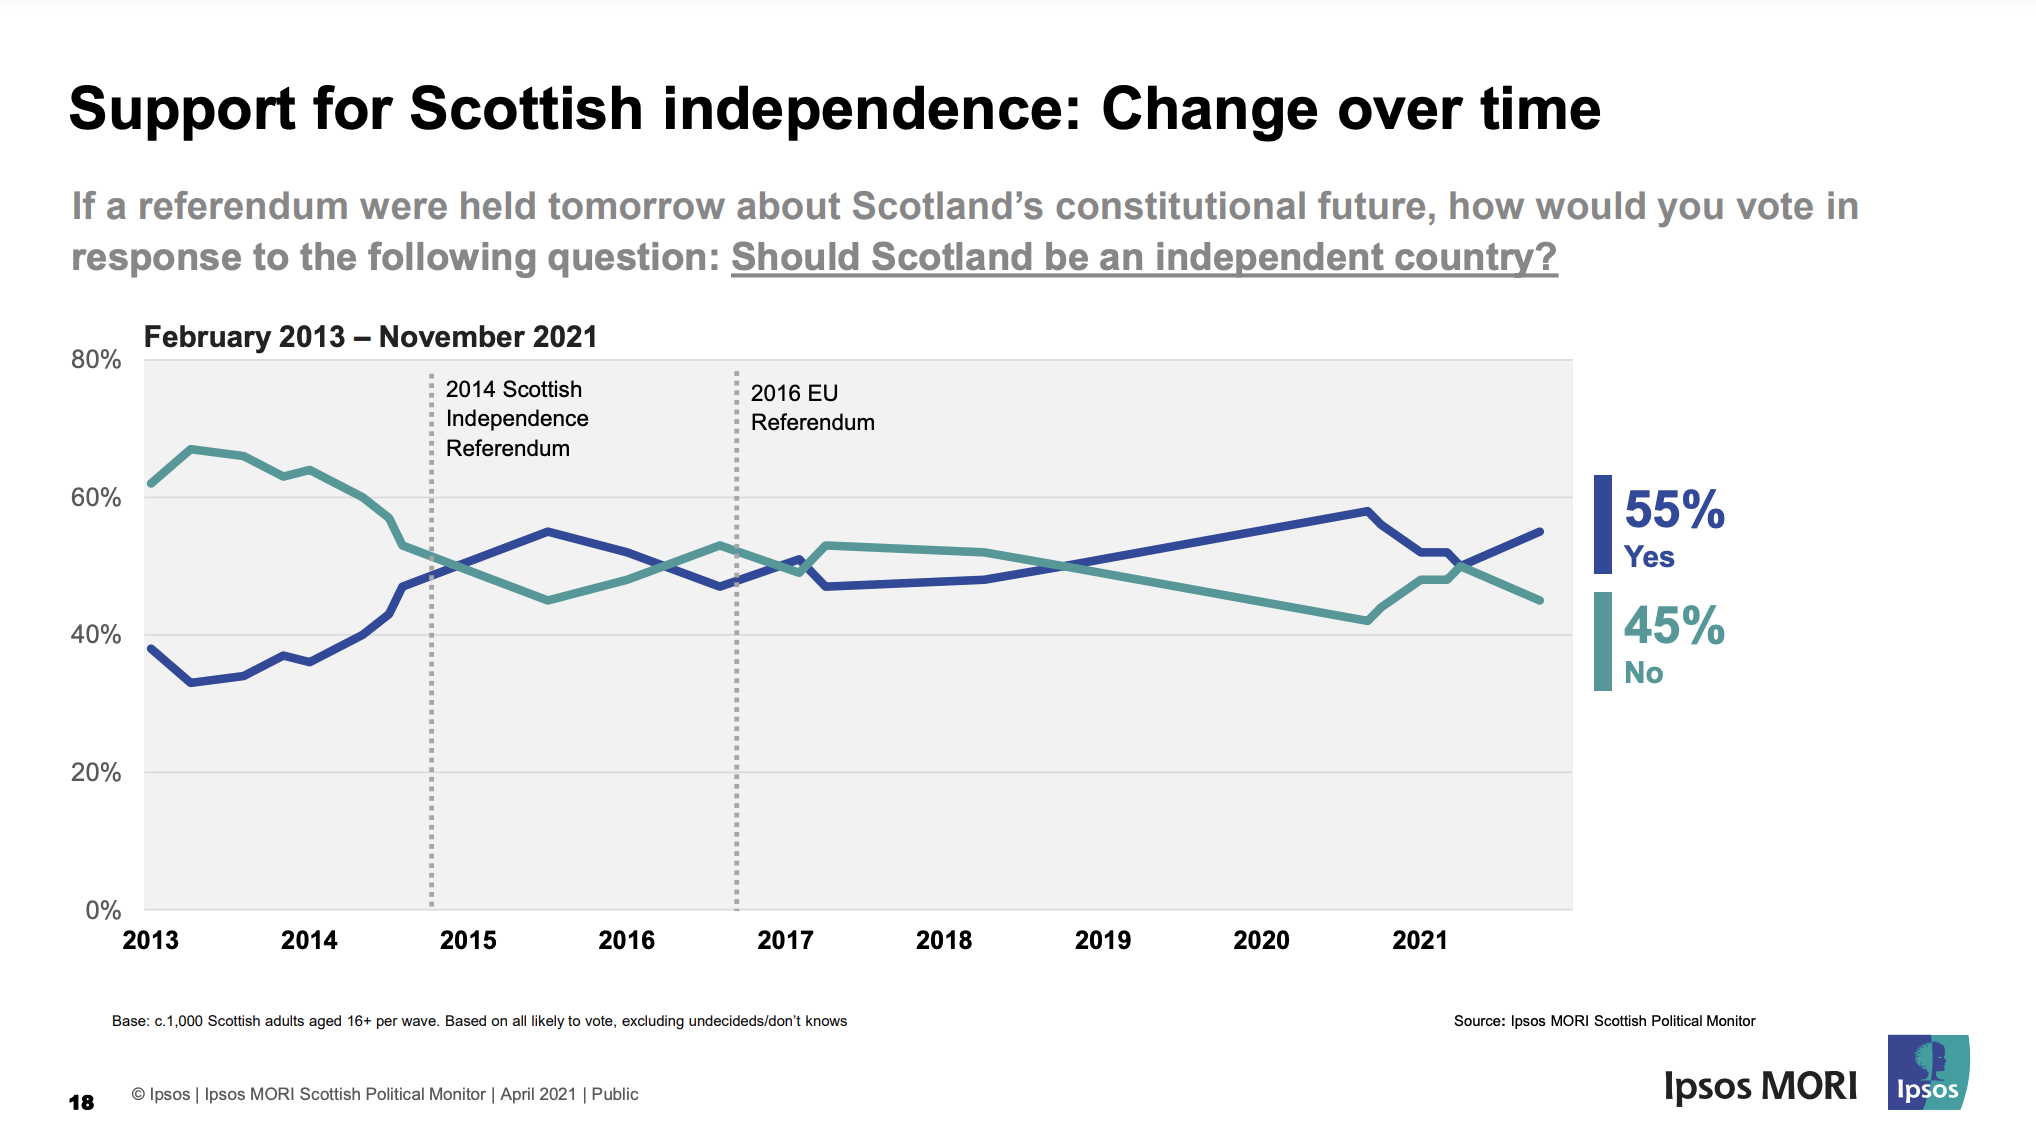 Support for Scottish independence: change over time